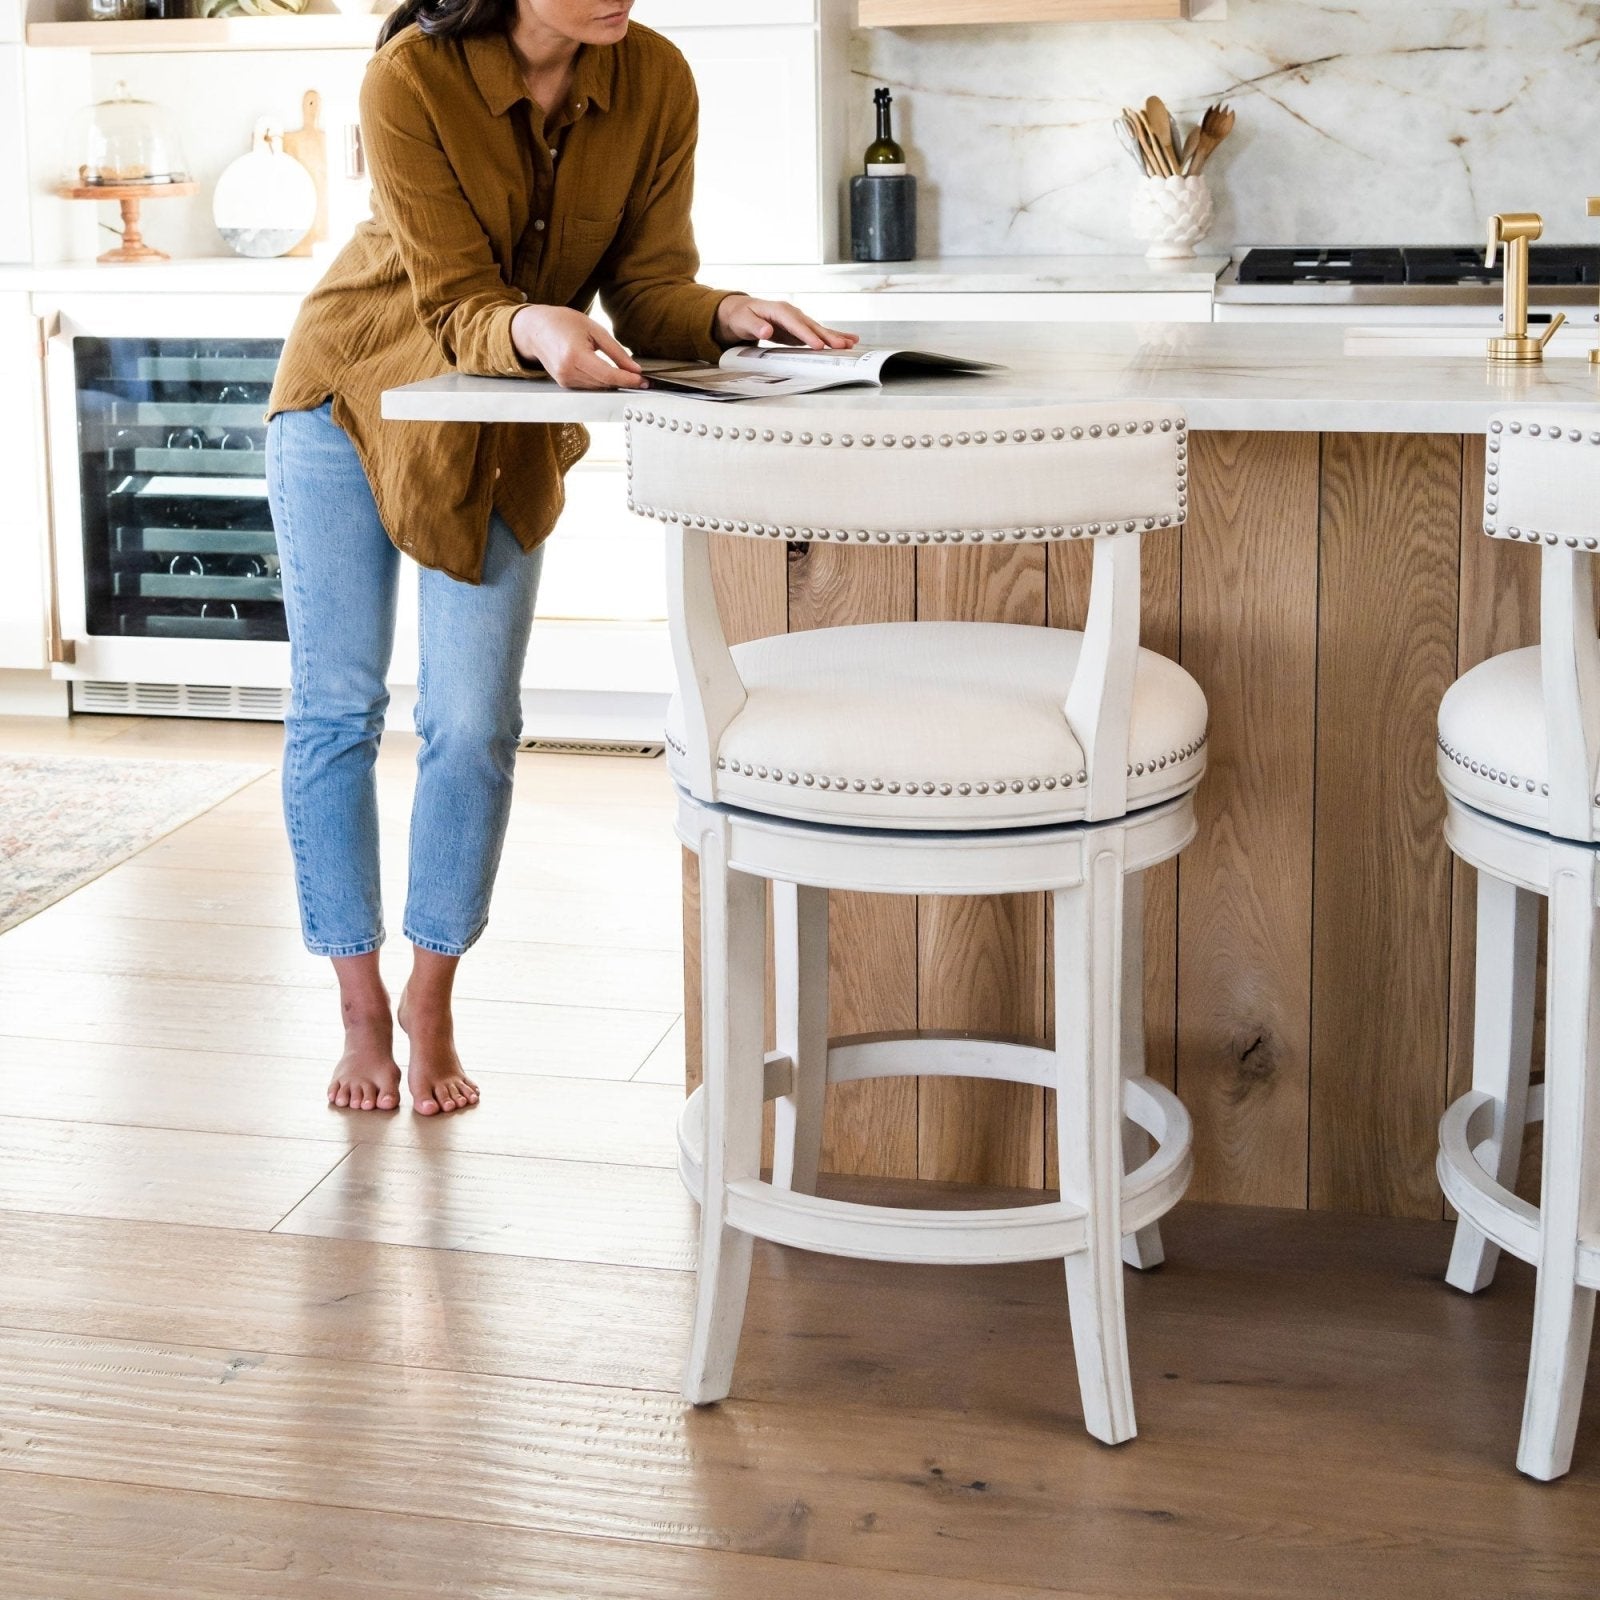 Alexander Bar Stool in White Oak Finish with Natural Color Fabric Upholstery in Stools by Maven Lane